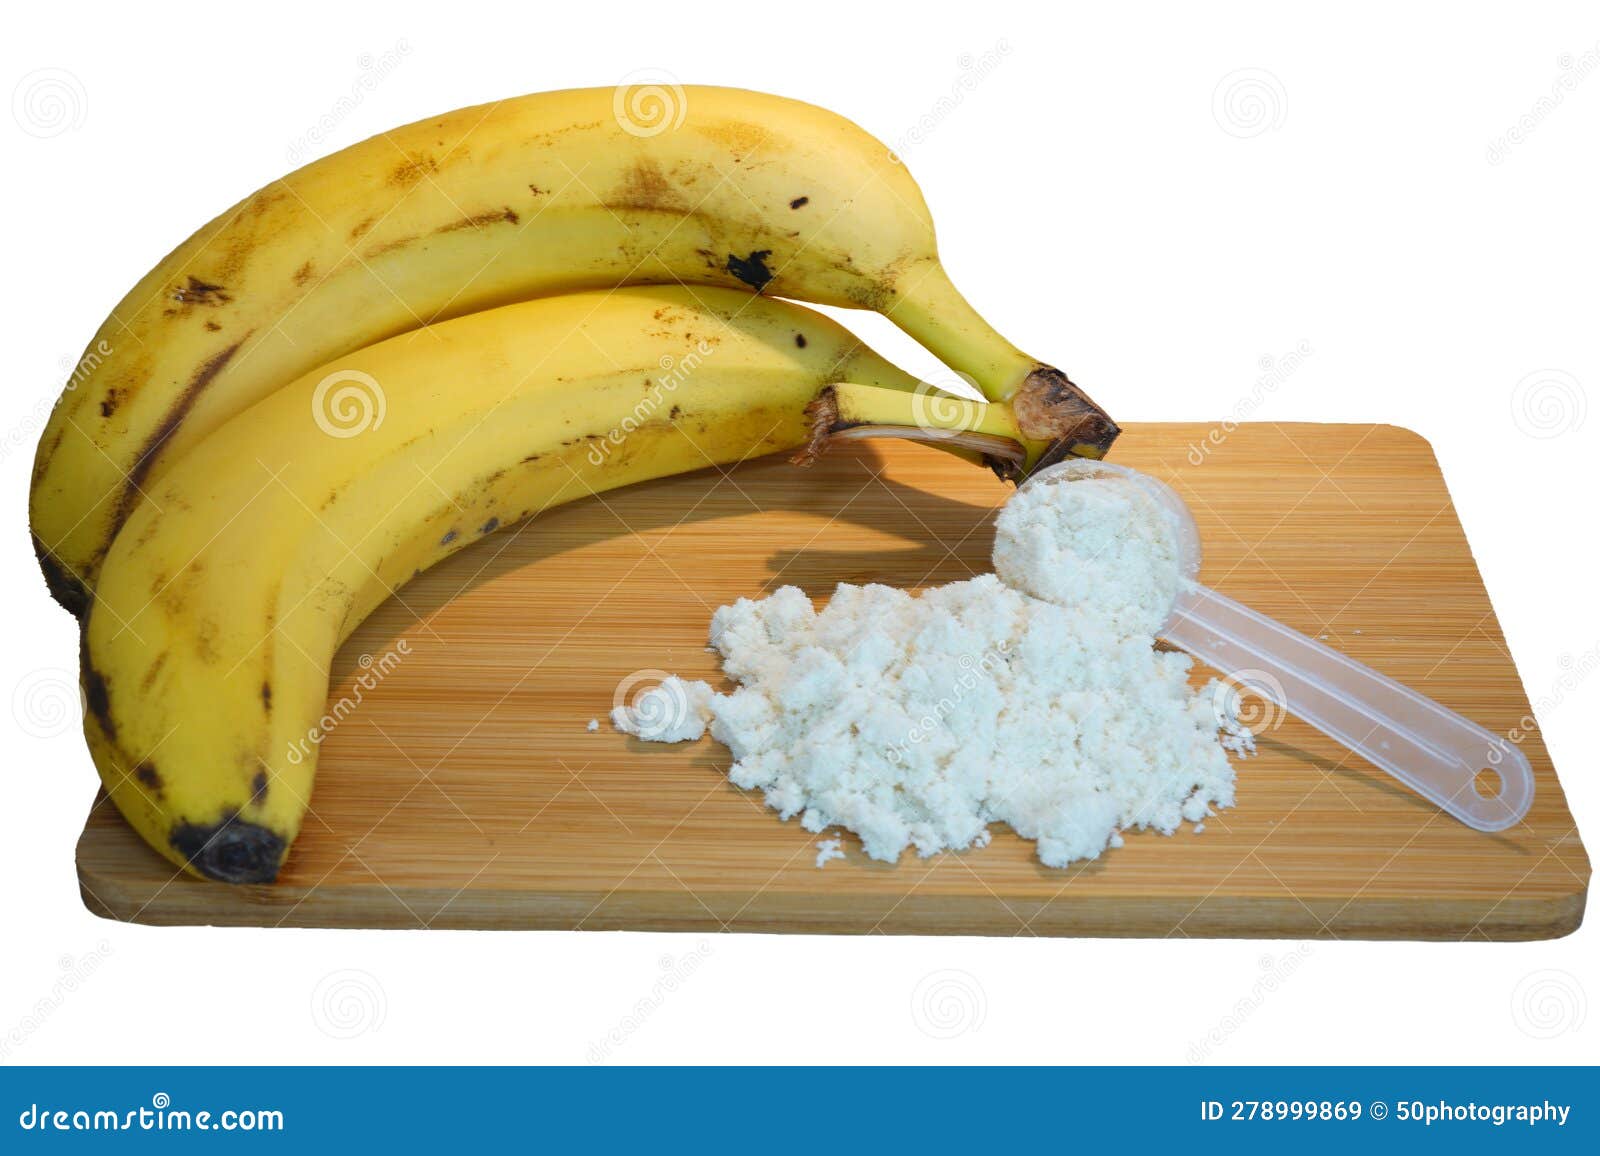 bananas and whey protein powder on a wooden board